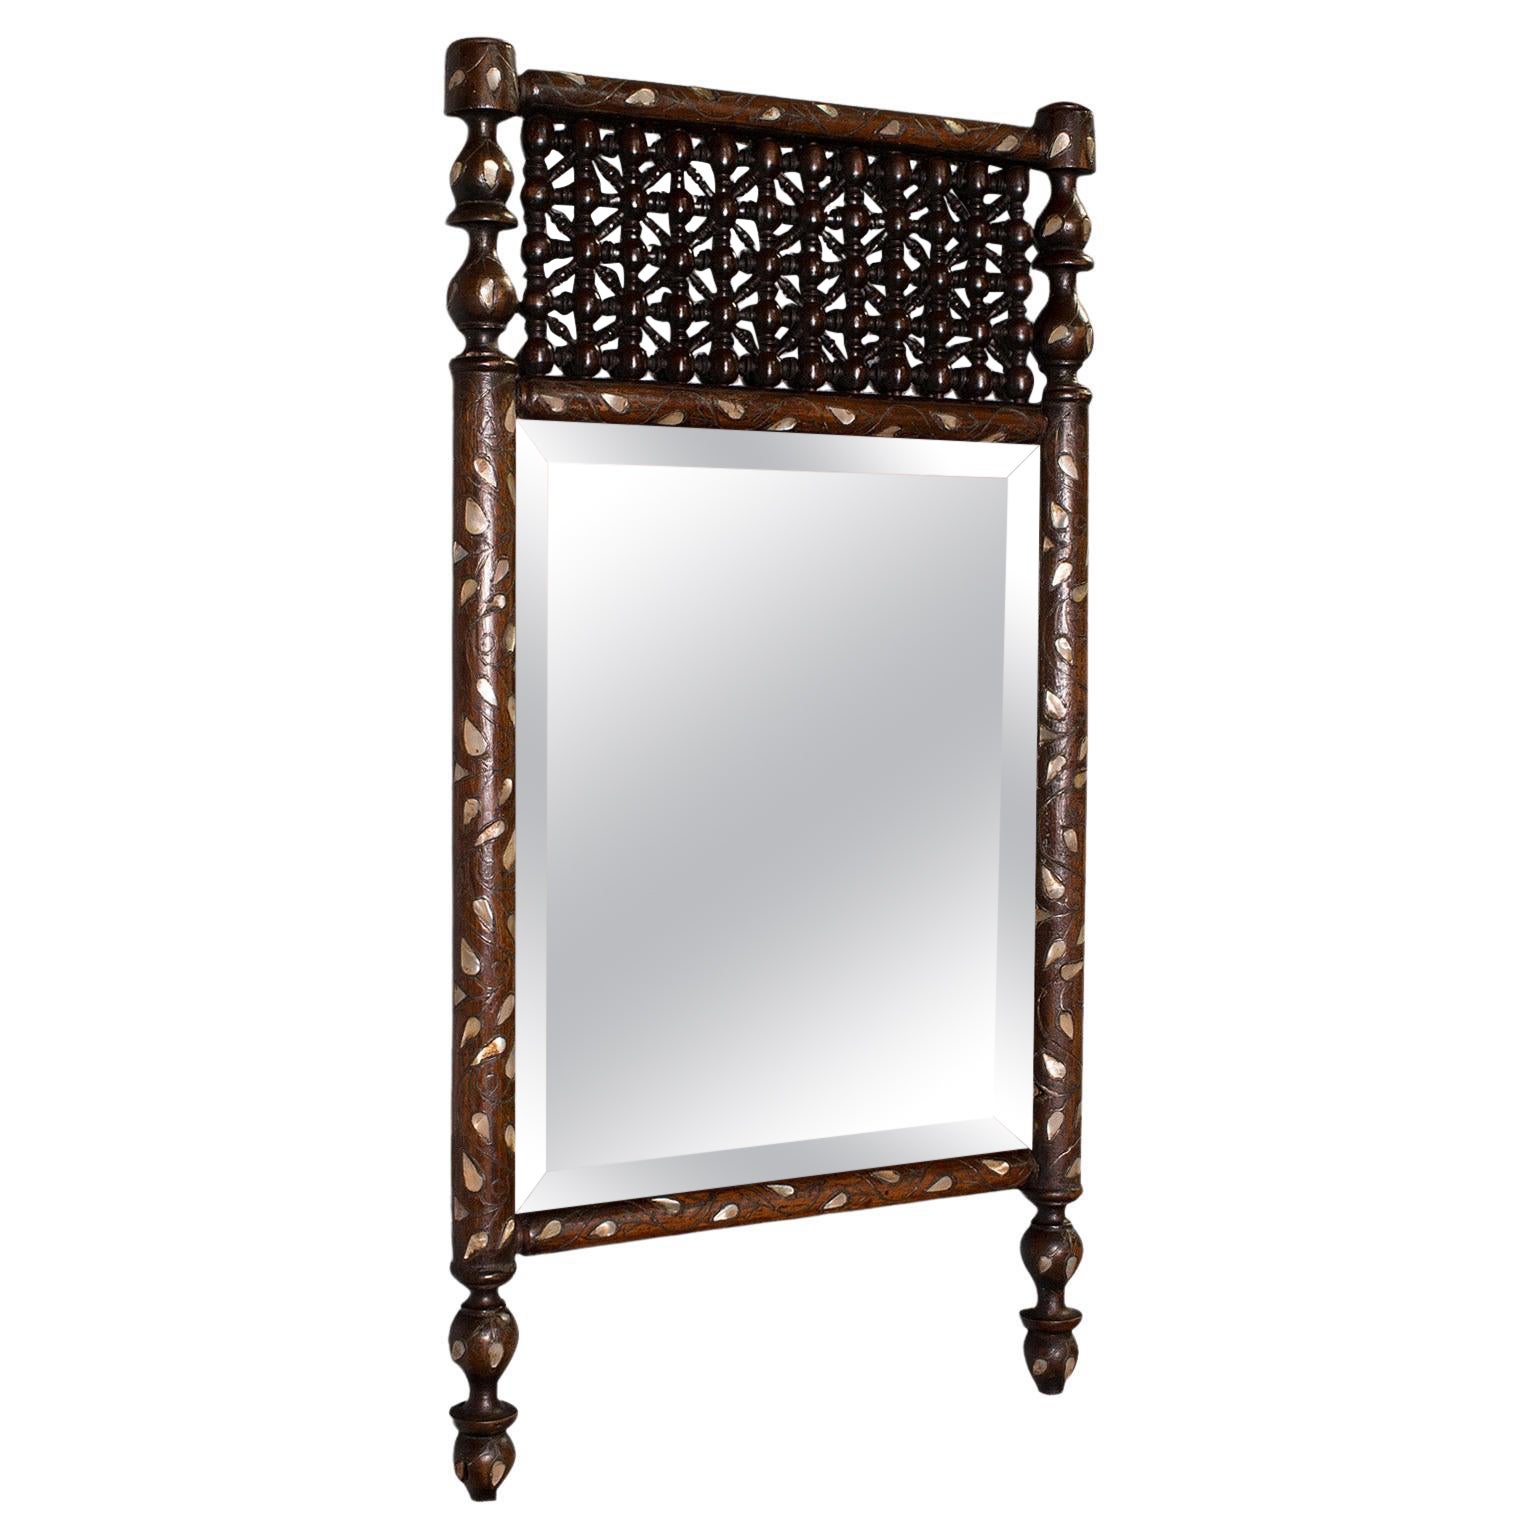 Antique Decorative Wall Mirror, Anglo Indian, Colonial, Late Victorian, C.1900 For Sale